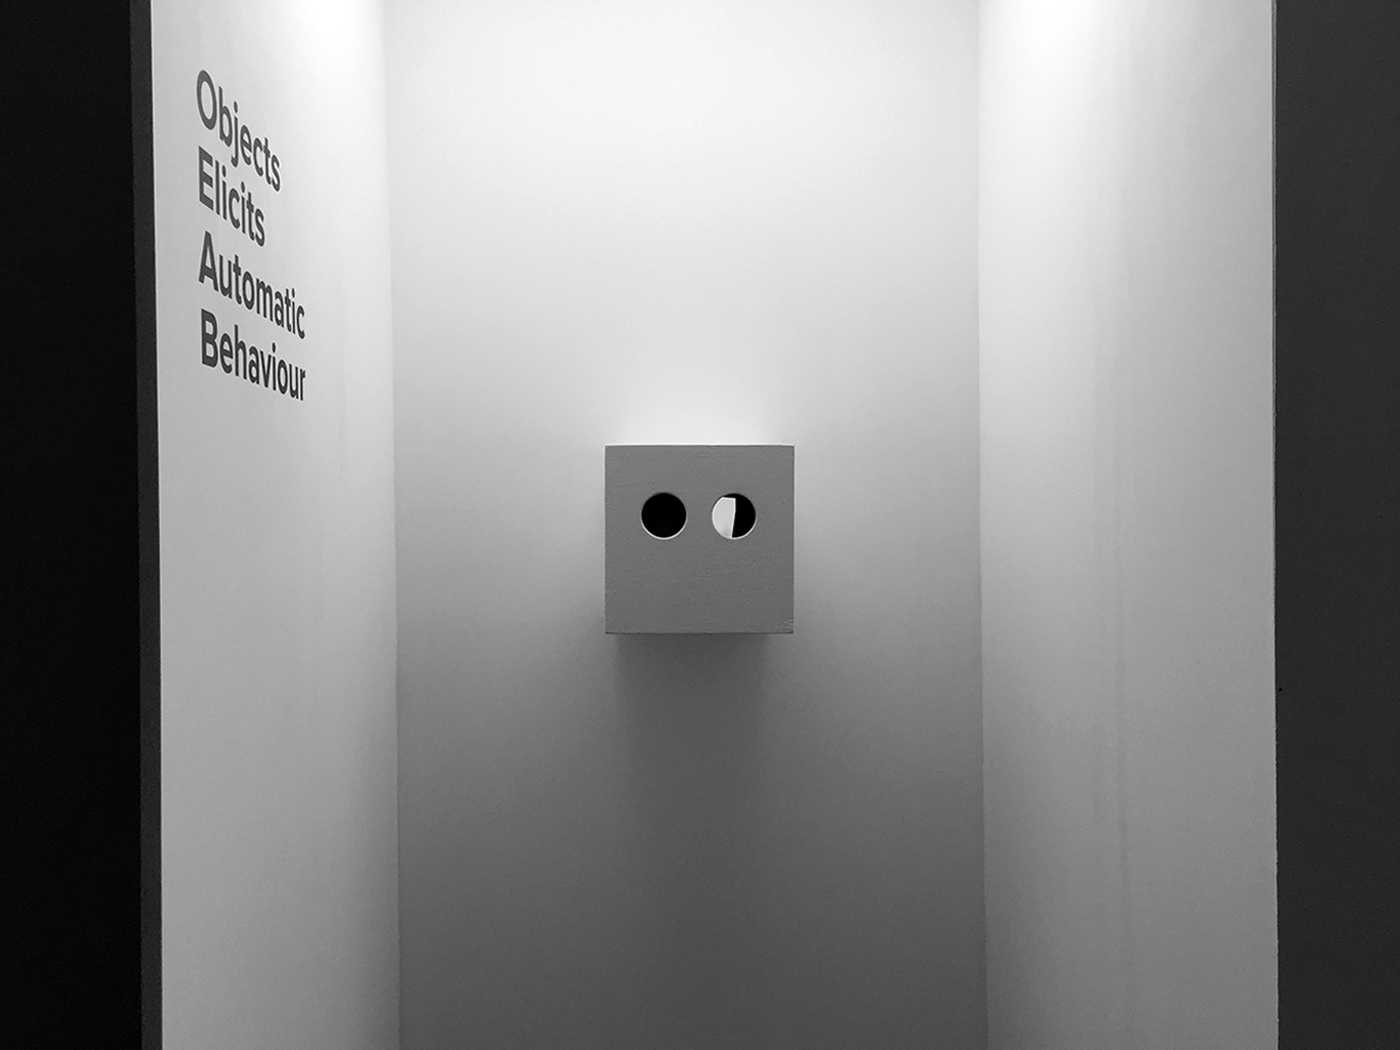 Codes of Conduct Behaviour mundane Experience environment objects installation